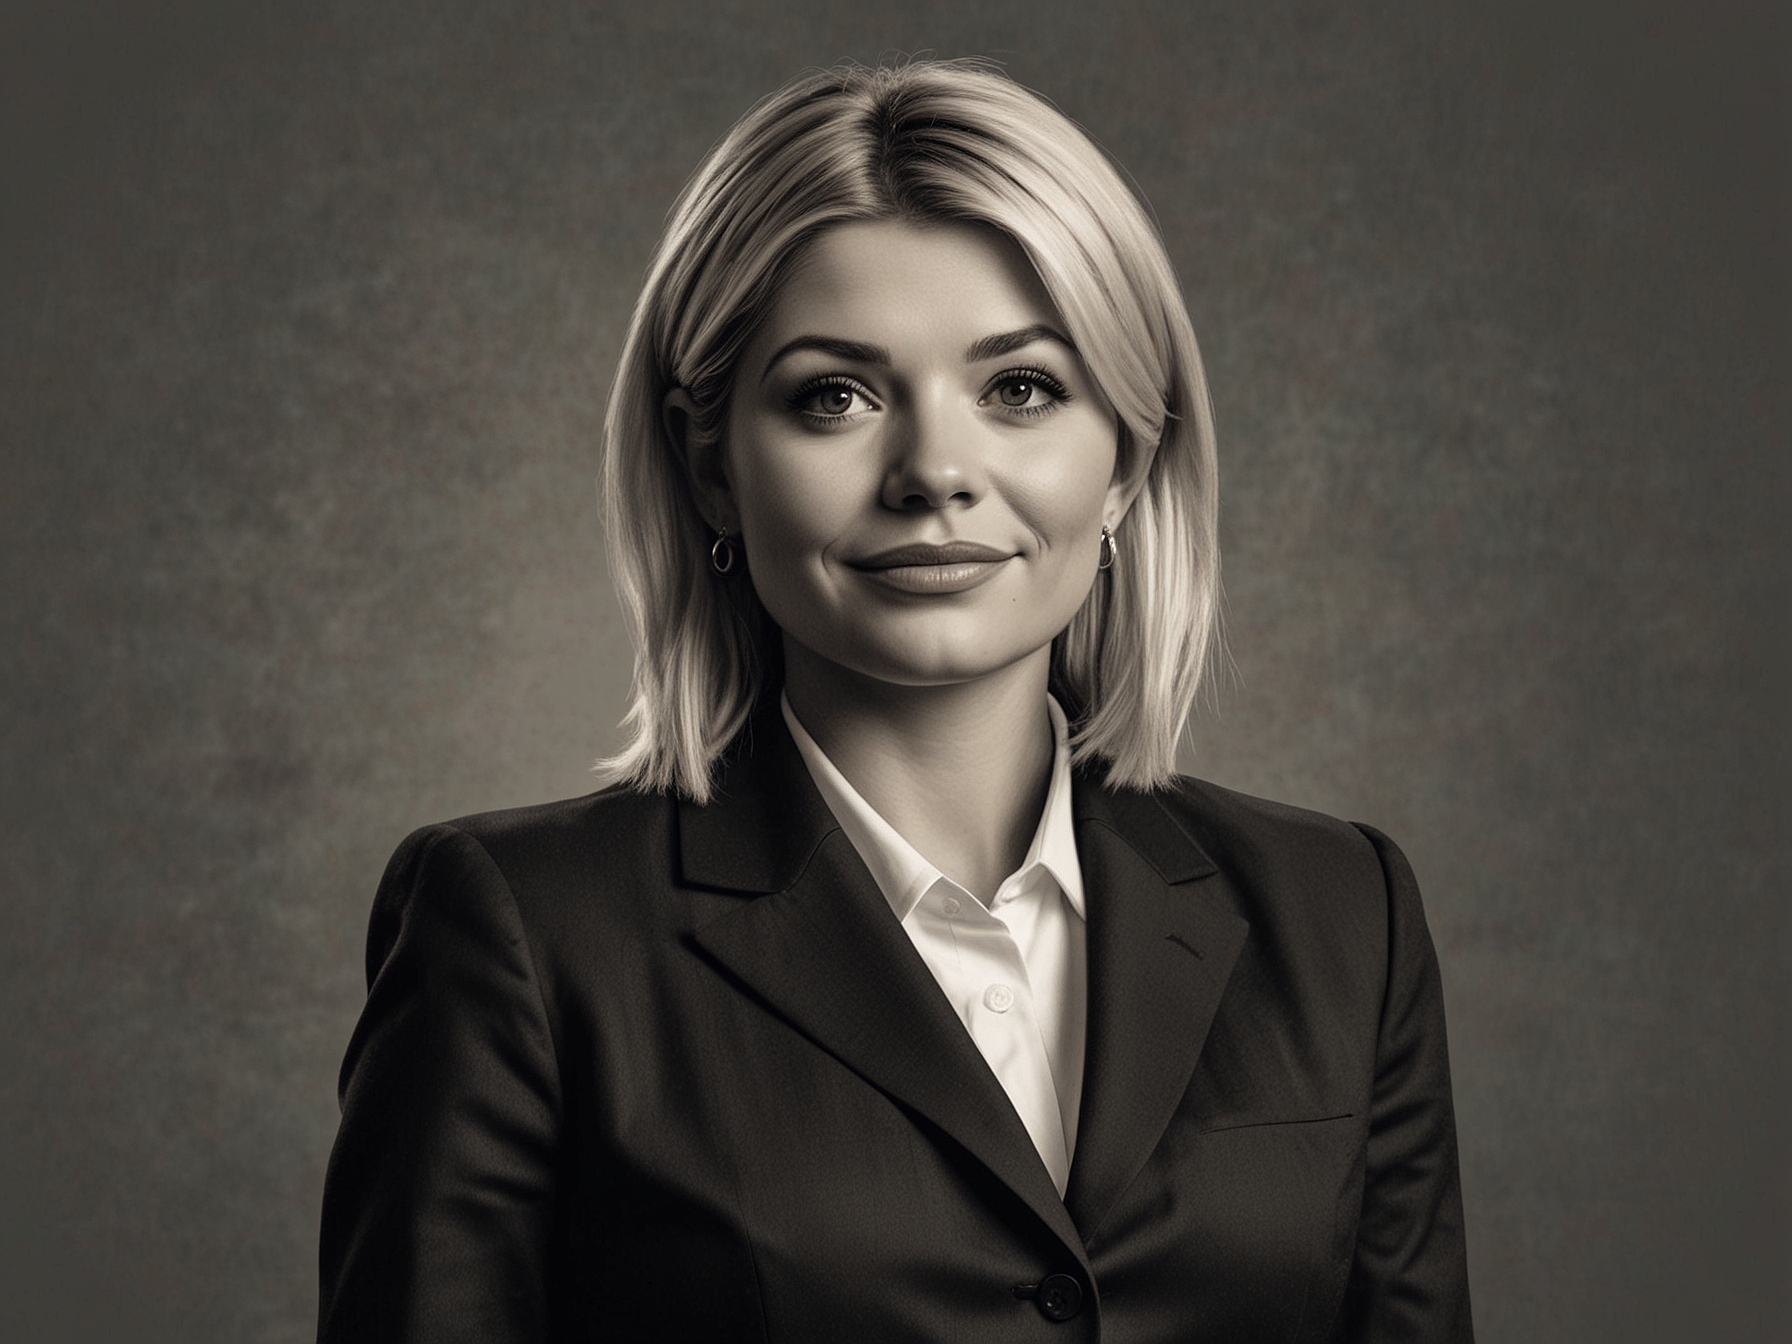 Holly Willoughby on ITV's 'This Morning'. Her high profile has unfortunately made her a target, underscoring the growing security risks for public figures.